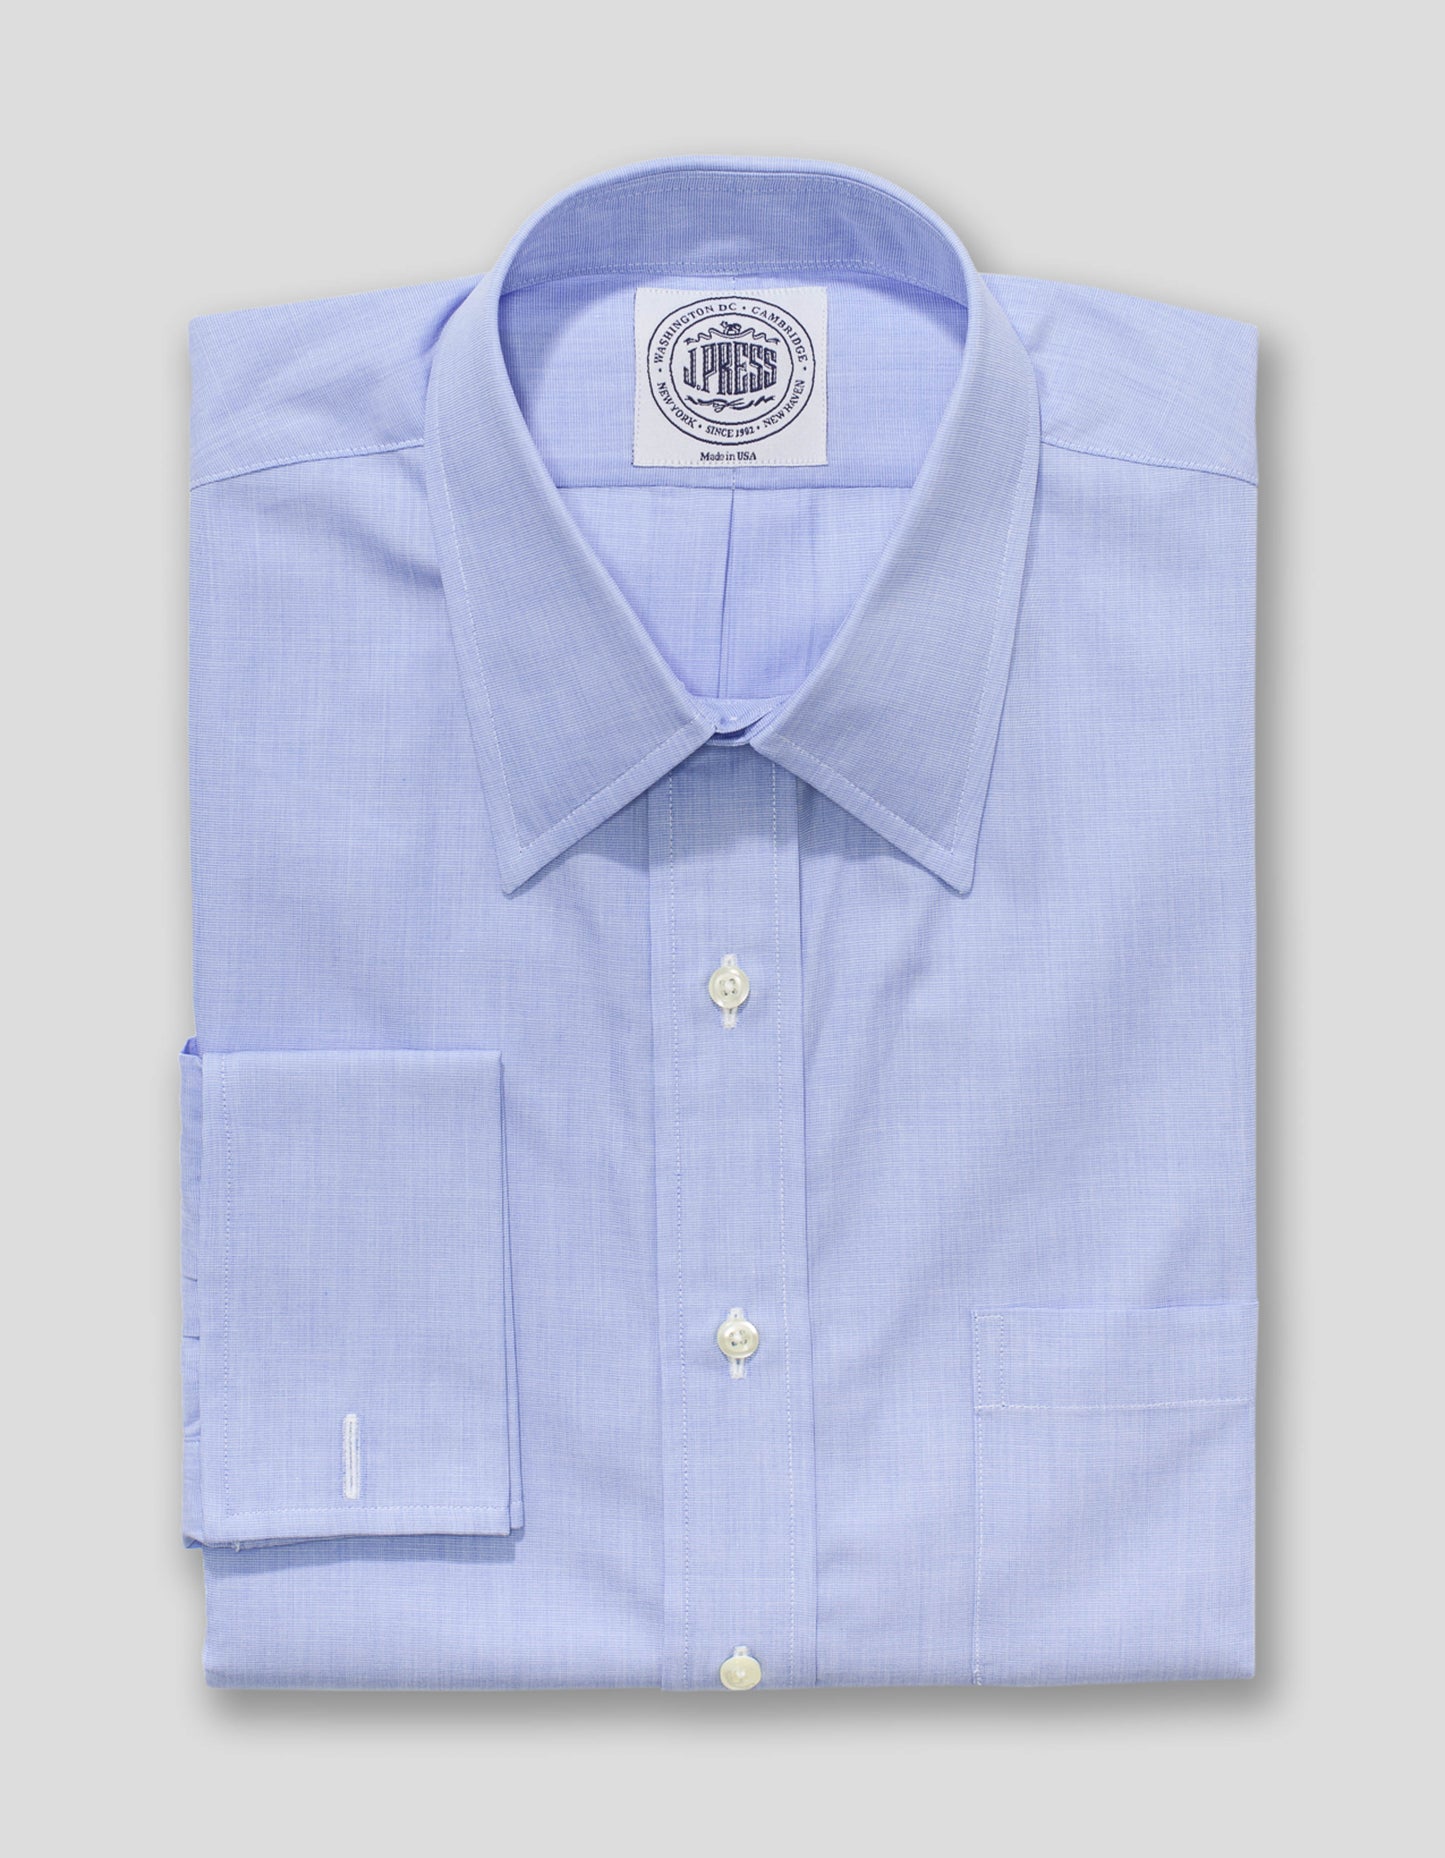 BLUE END-ON-END SHIRT WITH FRENCH CUFF DRESS SHIRT